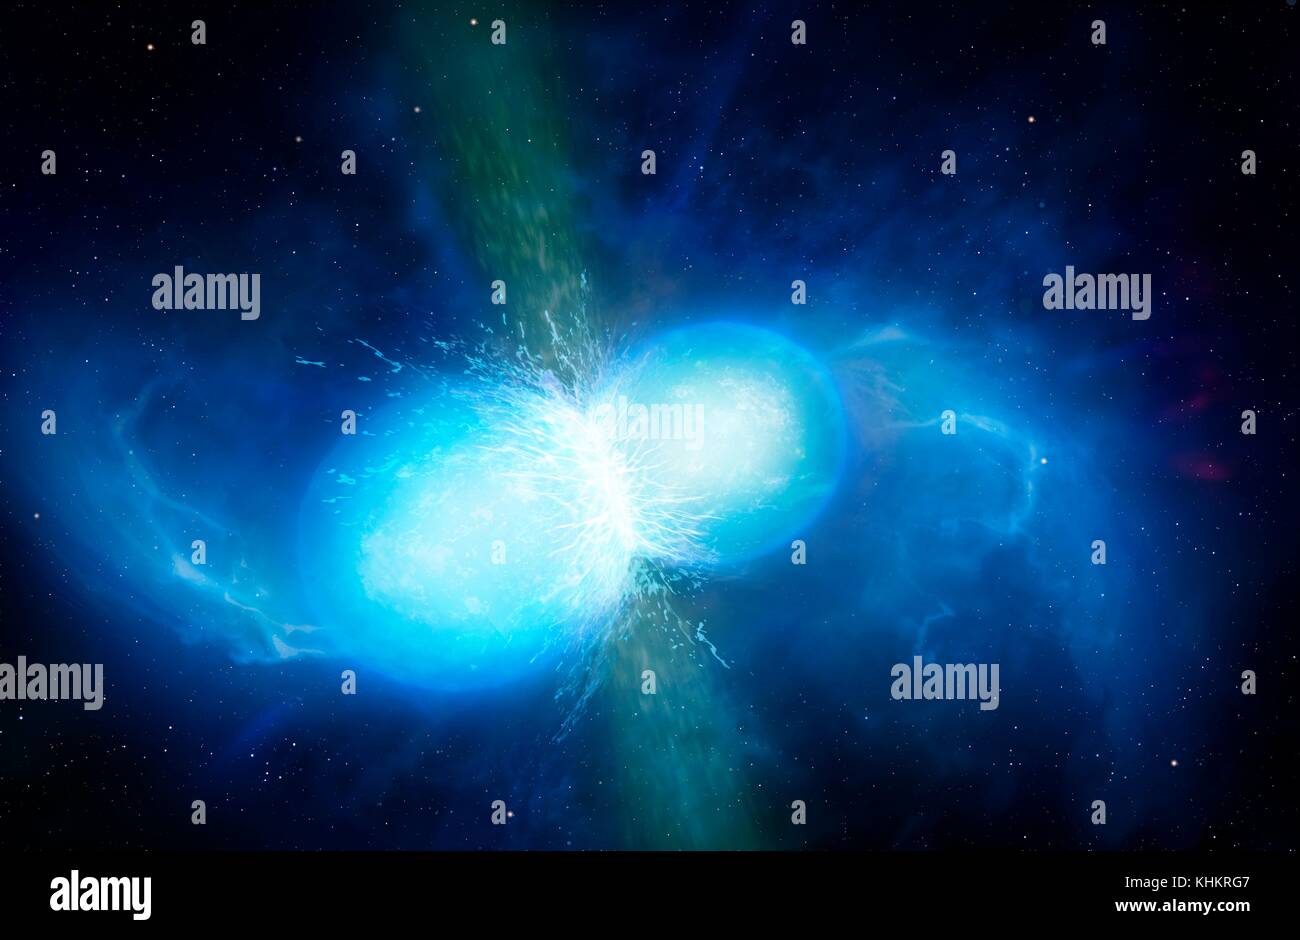 Neutron stars merging, illustration. Neutron stars are the remnants of stars that have run out of fuel and exploded as supernova, eventually collapsing into a superdense core. A typical neutron star has a mass of between 1.3 and 2.1 solar masses but measures only 10km in diameter. Neutron stars can exist as paired, or binary, stars. Seen here is the very final stage, just before full merger. This causes a violent burst of magnetic radiation lasting milliseconds. It is suggested that this is the source of short gamma ray bursts. Stock Photo